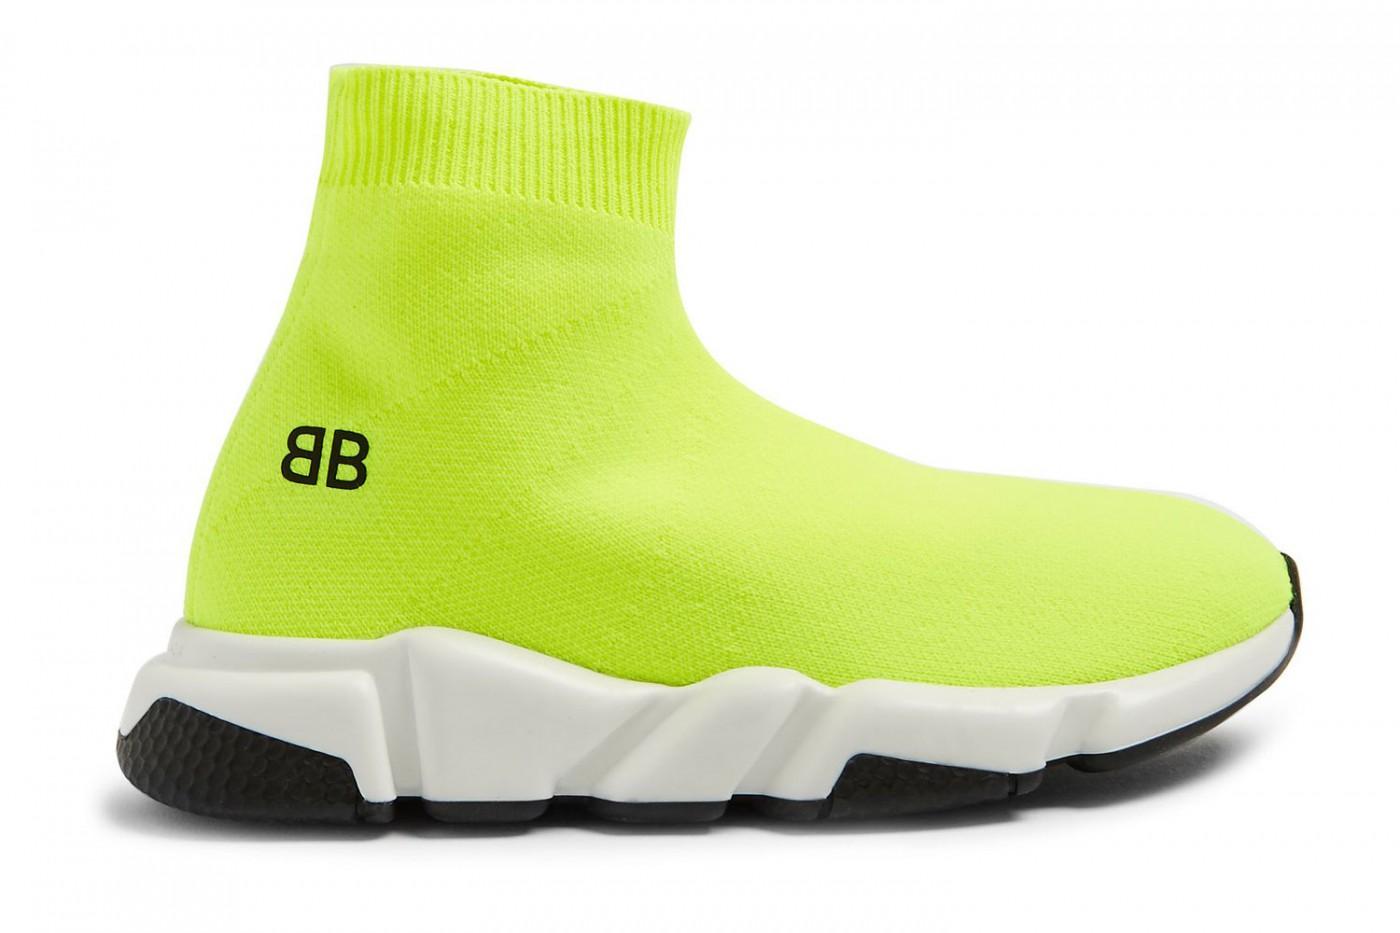 kapsel sne Lydighed Balenciaga's Kids Shoes Are Here And They Cost $295